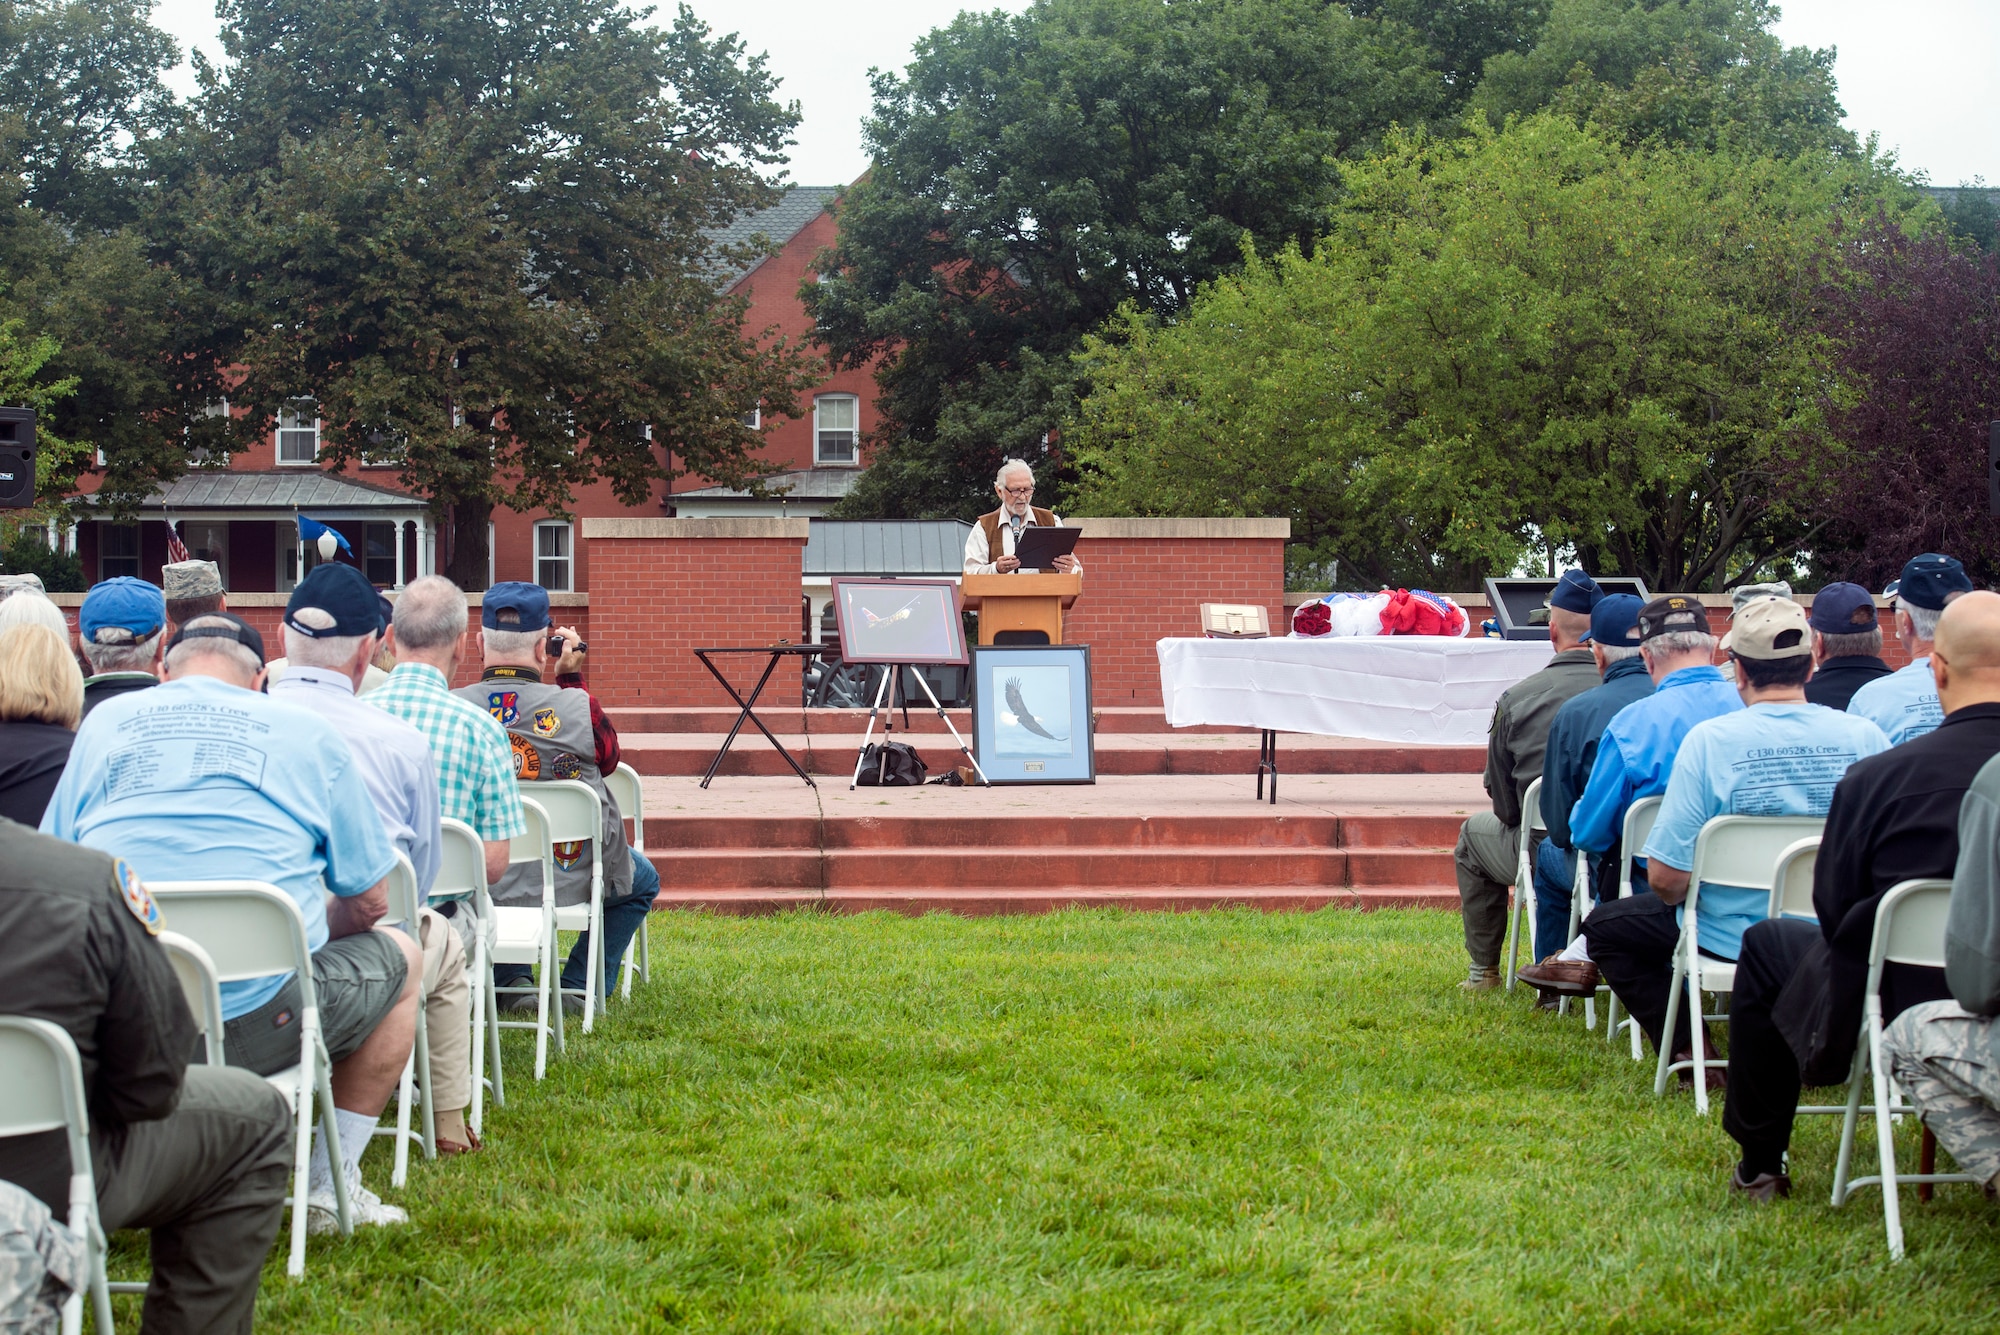 Retired U.S. Air Force Master Sgt. Lonnie Henderson, an intelligence, surveillance and reconnaissance retiree and Prop Wash Gang member, speaks during the 60528 Remembrance Ceremony held Aug. 30, 2018, at Offutt Air Force Base, Nebraska. The ceremony was held to honor the 17 crewmembers who were lost during the Cold War when their C-130, which was modified to fly reconnaissance missions, was shot down. The aircraft’s tail number was 60528. The ceremony was attended by members of the Prop Wash Gang, a group of retired Intelligence Surveillance Reconnaissance operators, family members and fellow wingman to the fallen and ISR professionals. (U.S. Air Force Photo by L. Cunningham)